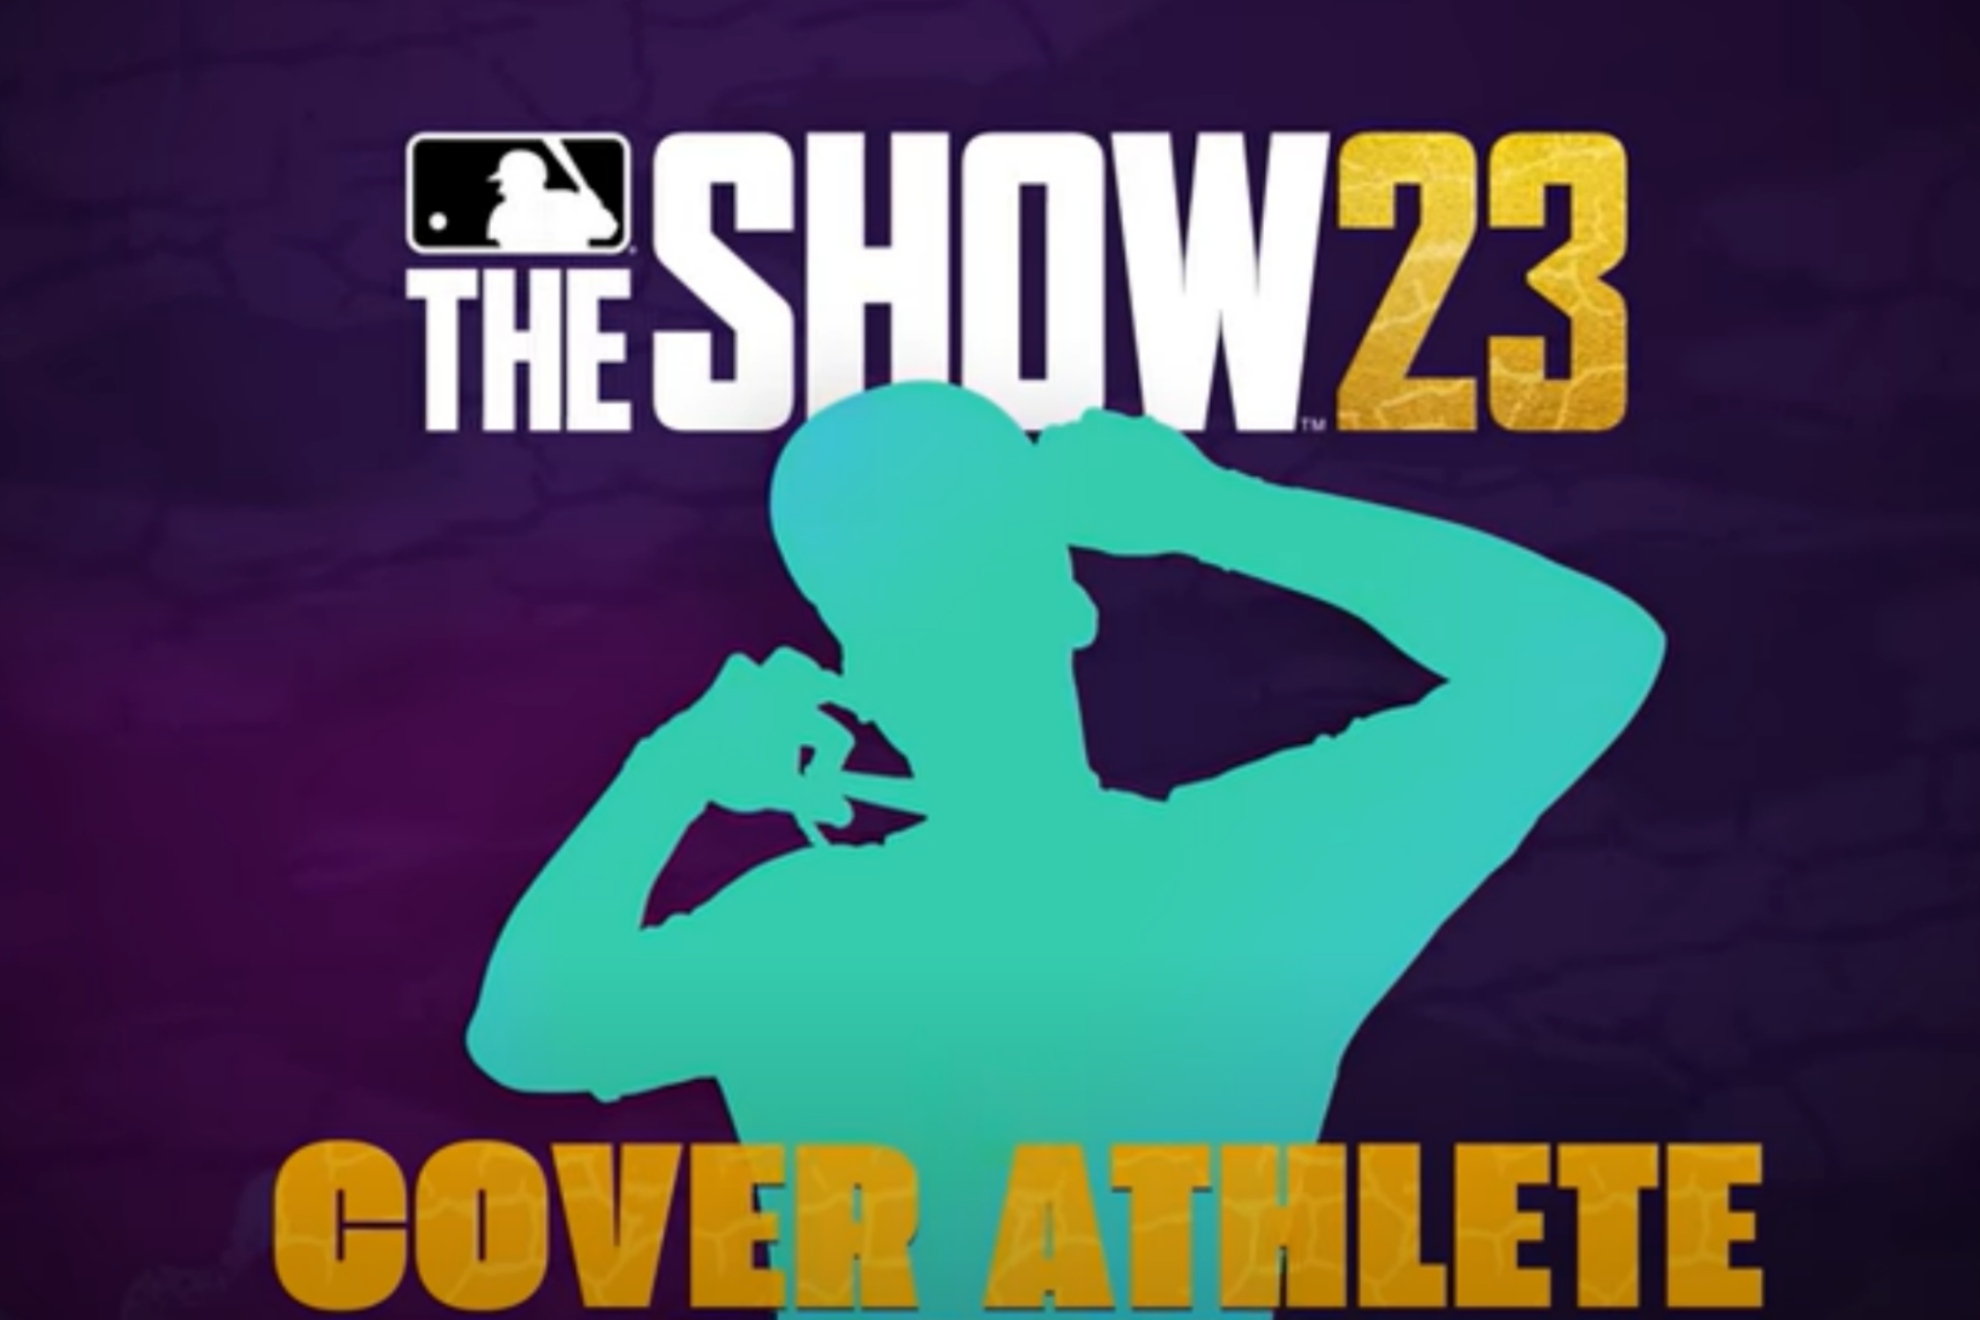 MLB The Show 23 finally reveals which player is on the cover of this years game